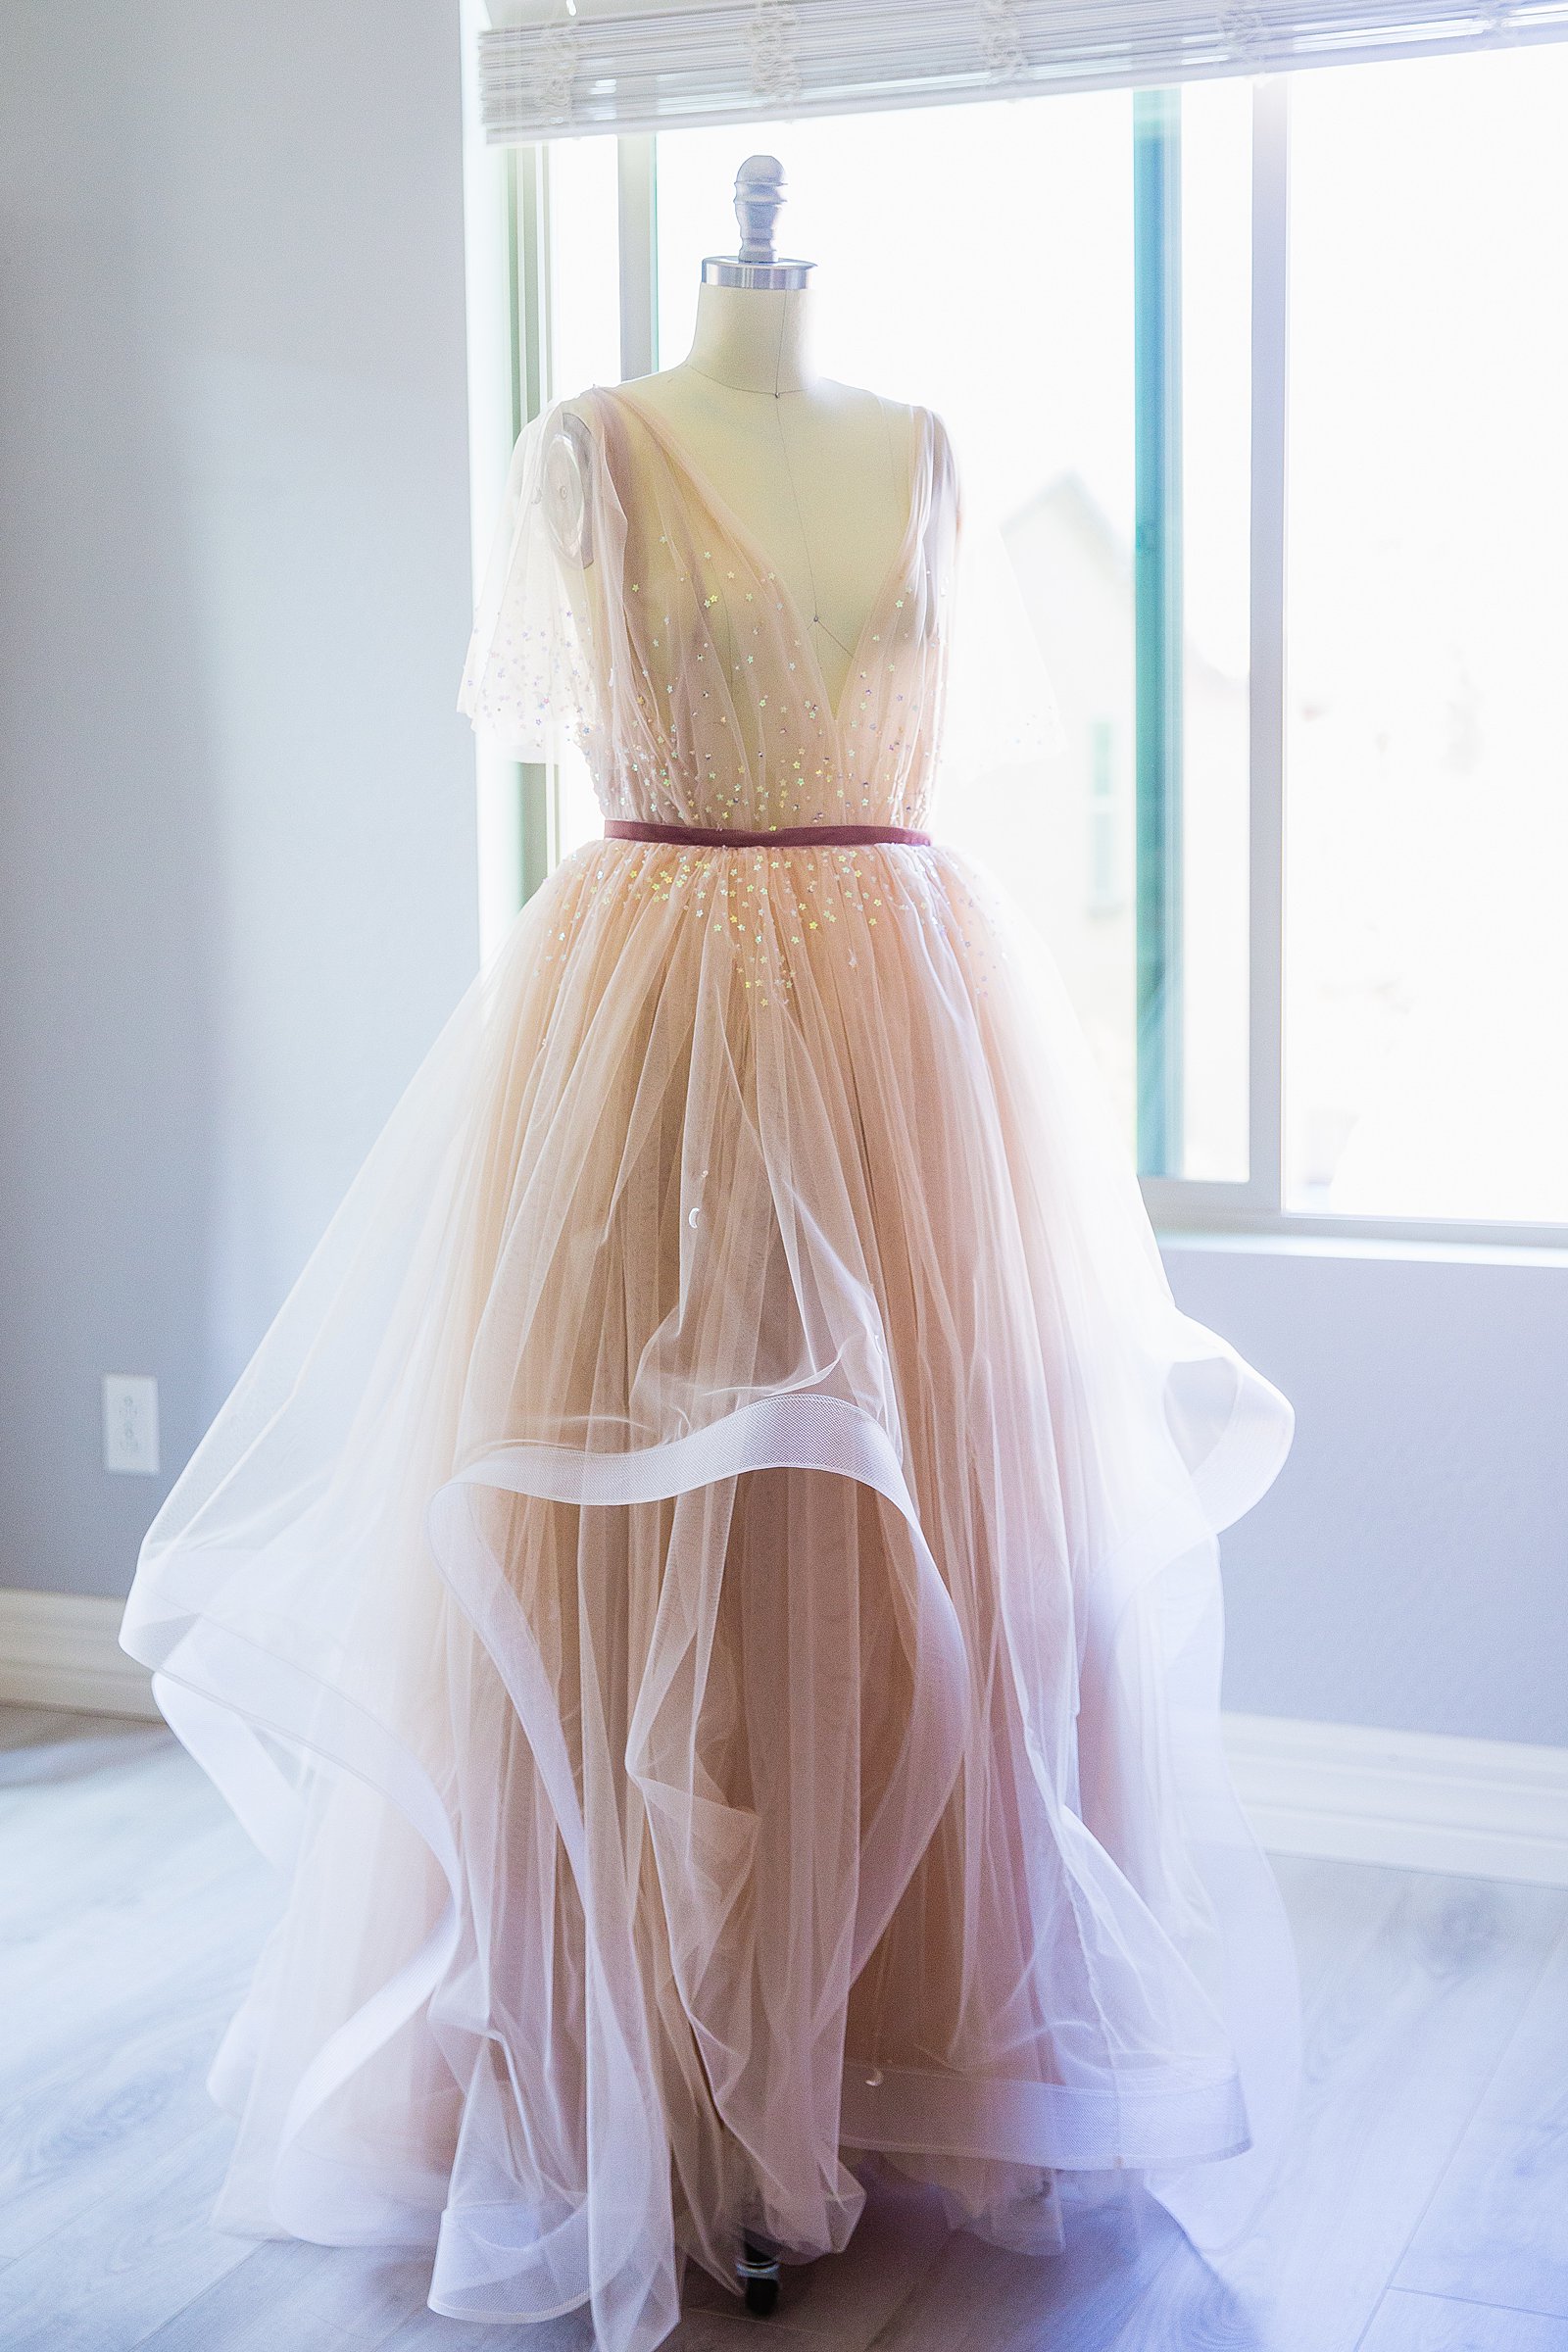 Bride's unique pink wedding dress for her Cloth and Flame Superstition Mountain wedding by PMA Photography.